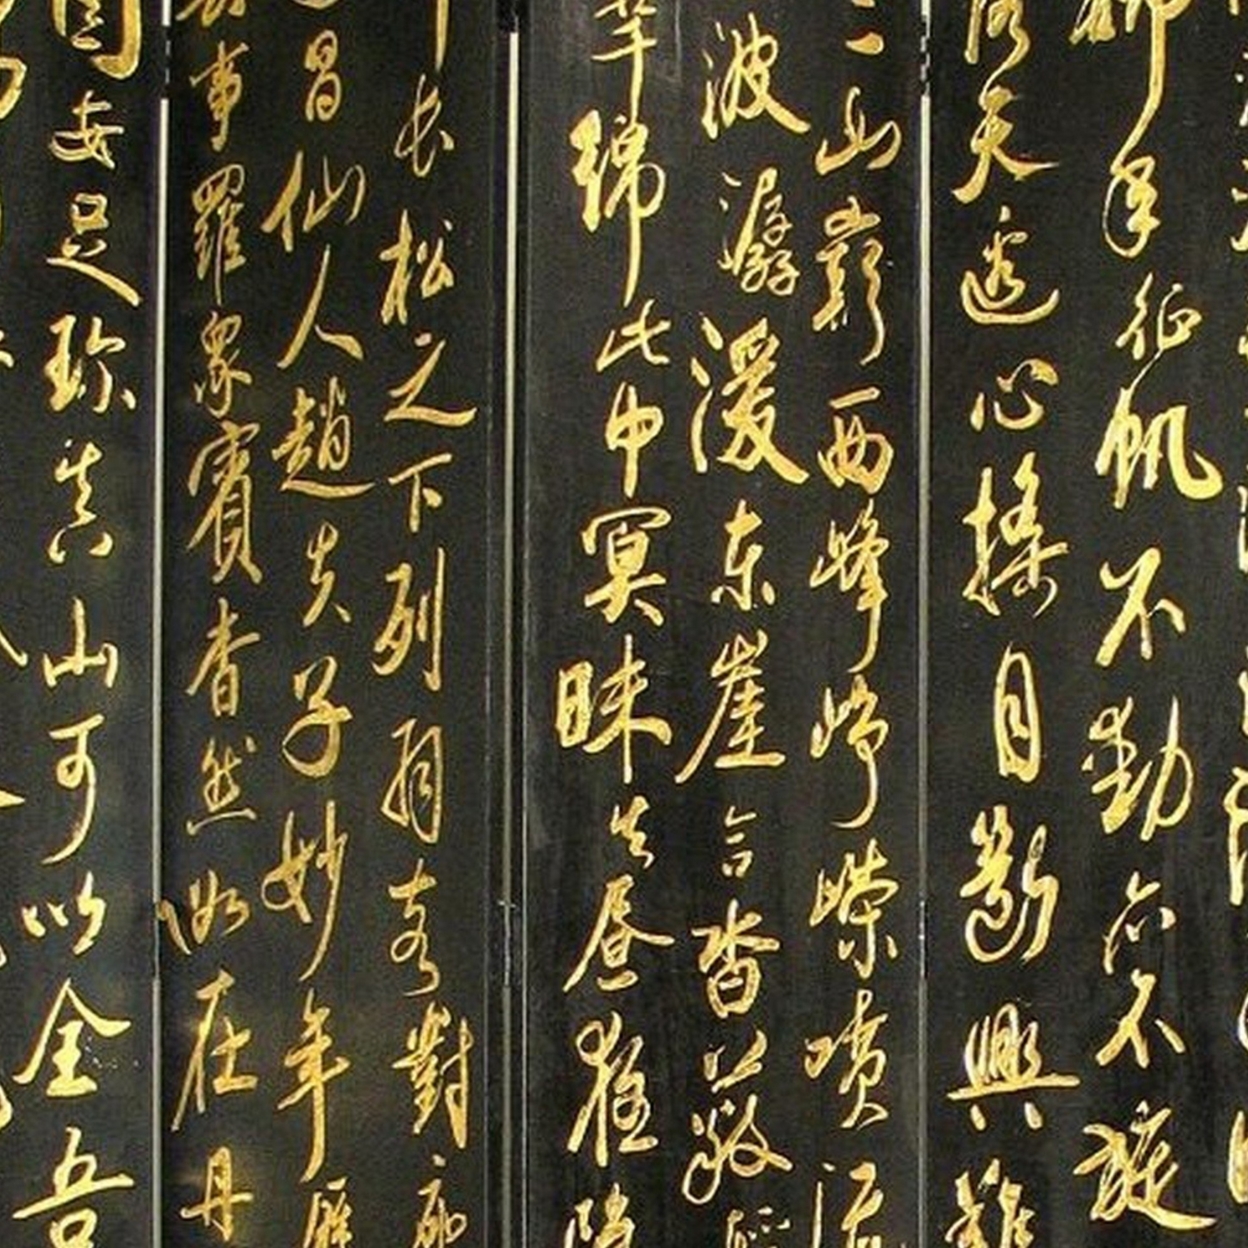 6 Panel Screen With Hand Painted Chinese Writing, Black And Gold- Saltoro Sherpi